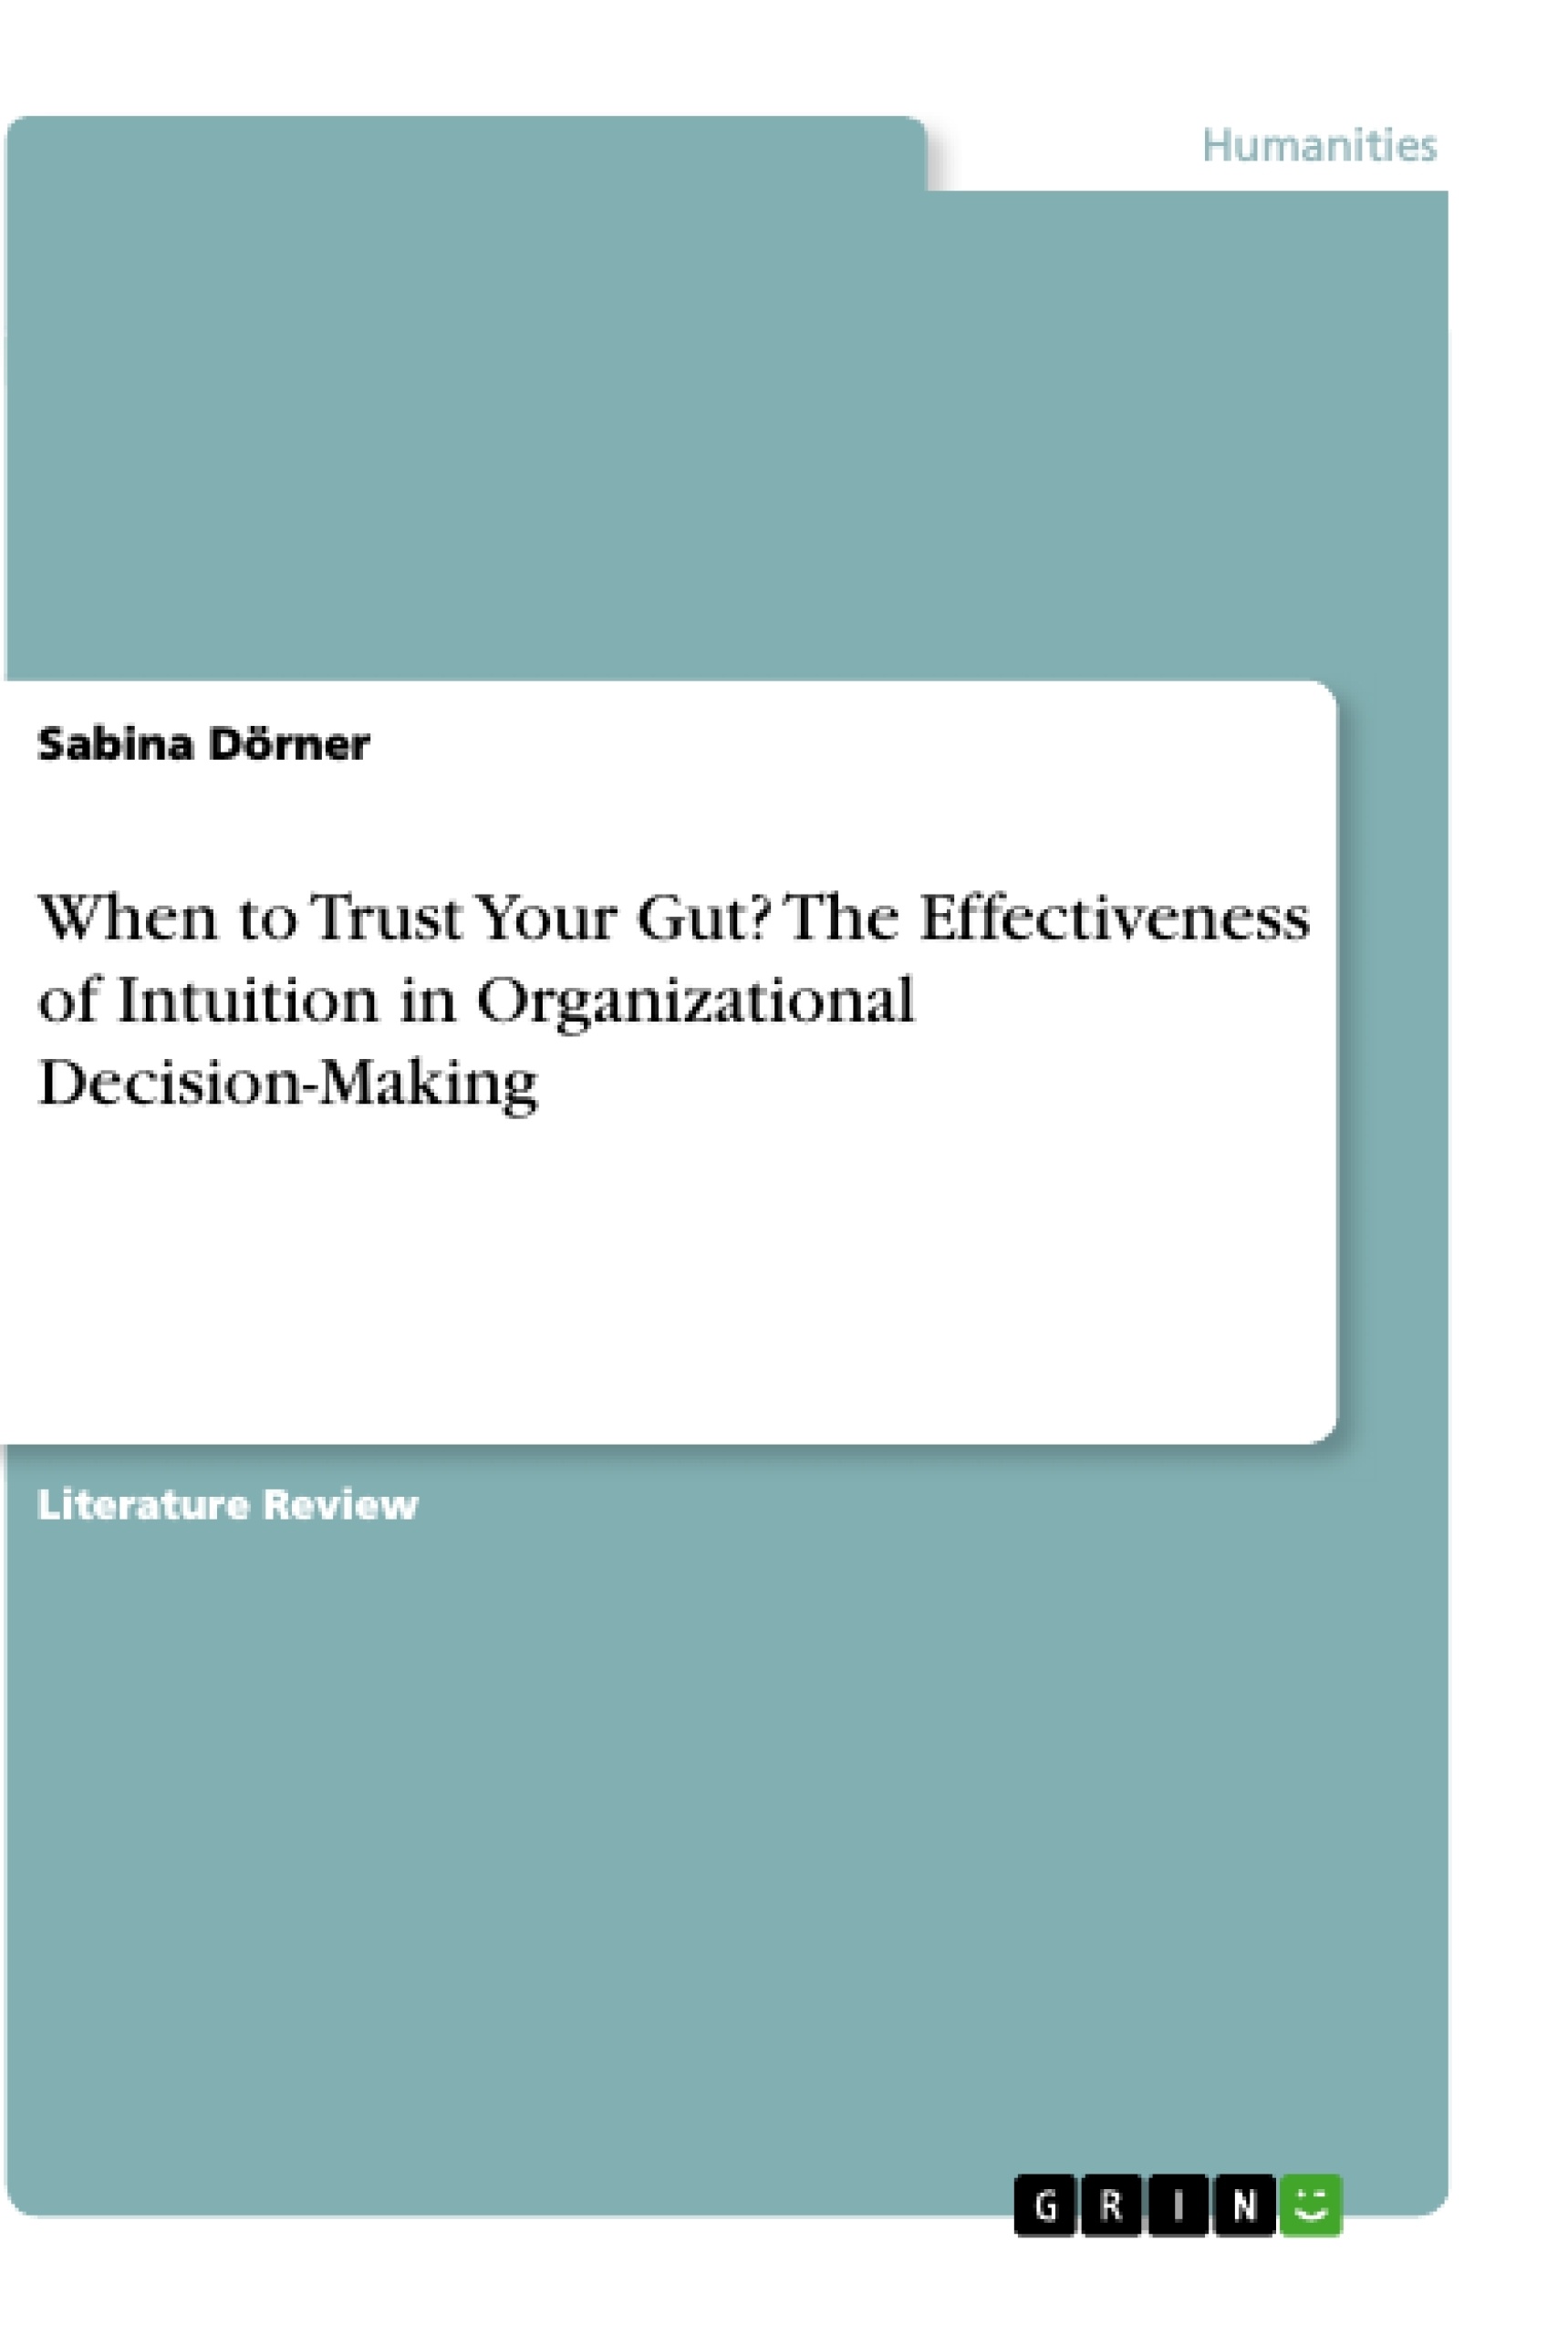 Title: When to Trust Your Gut? The Effectiveness of Intuition in Organizational Decision-Making